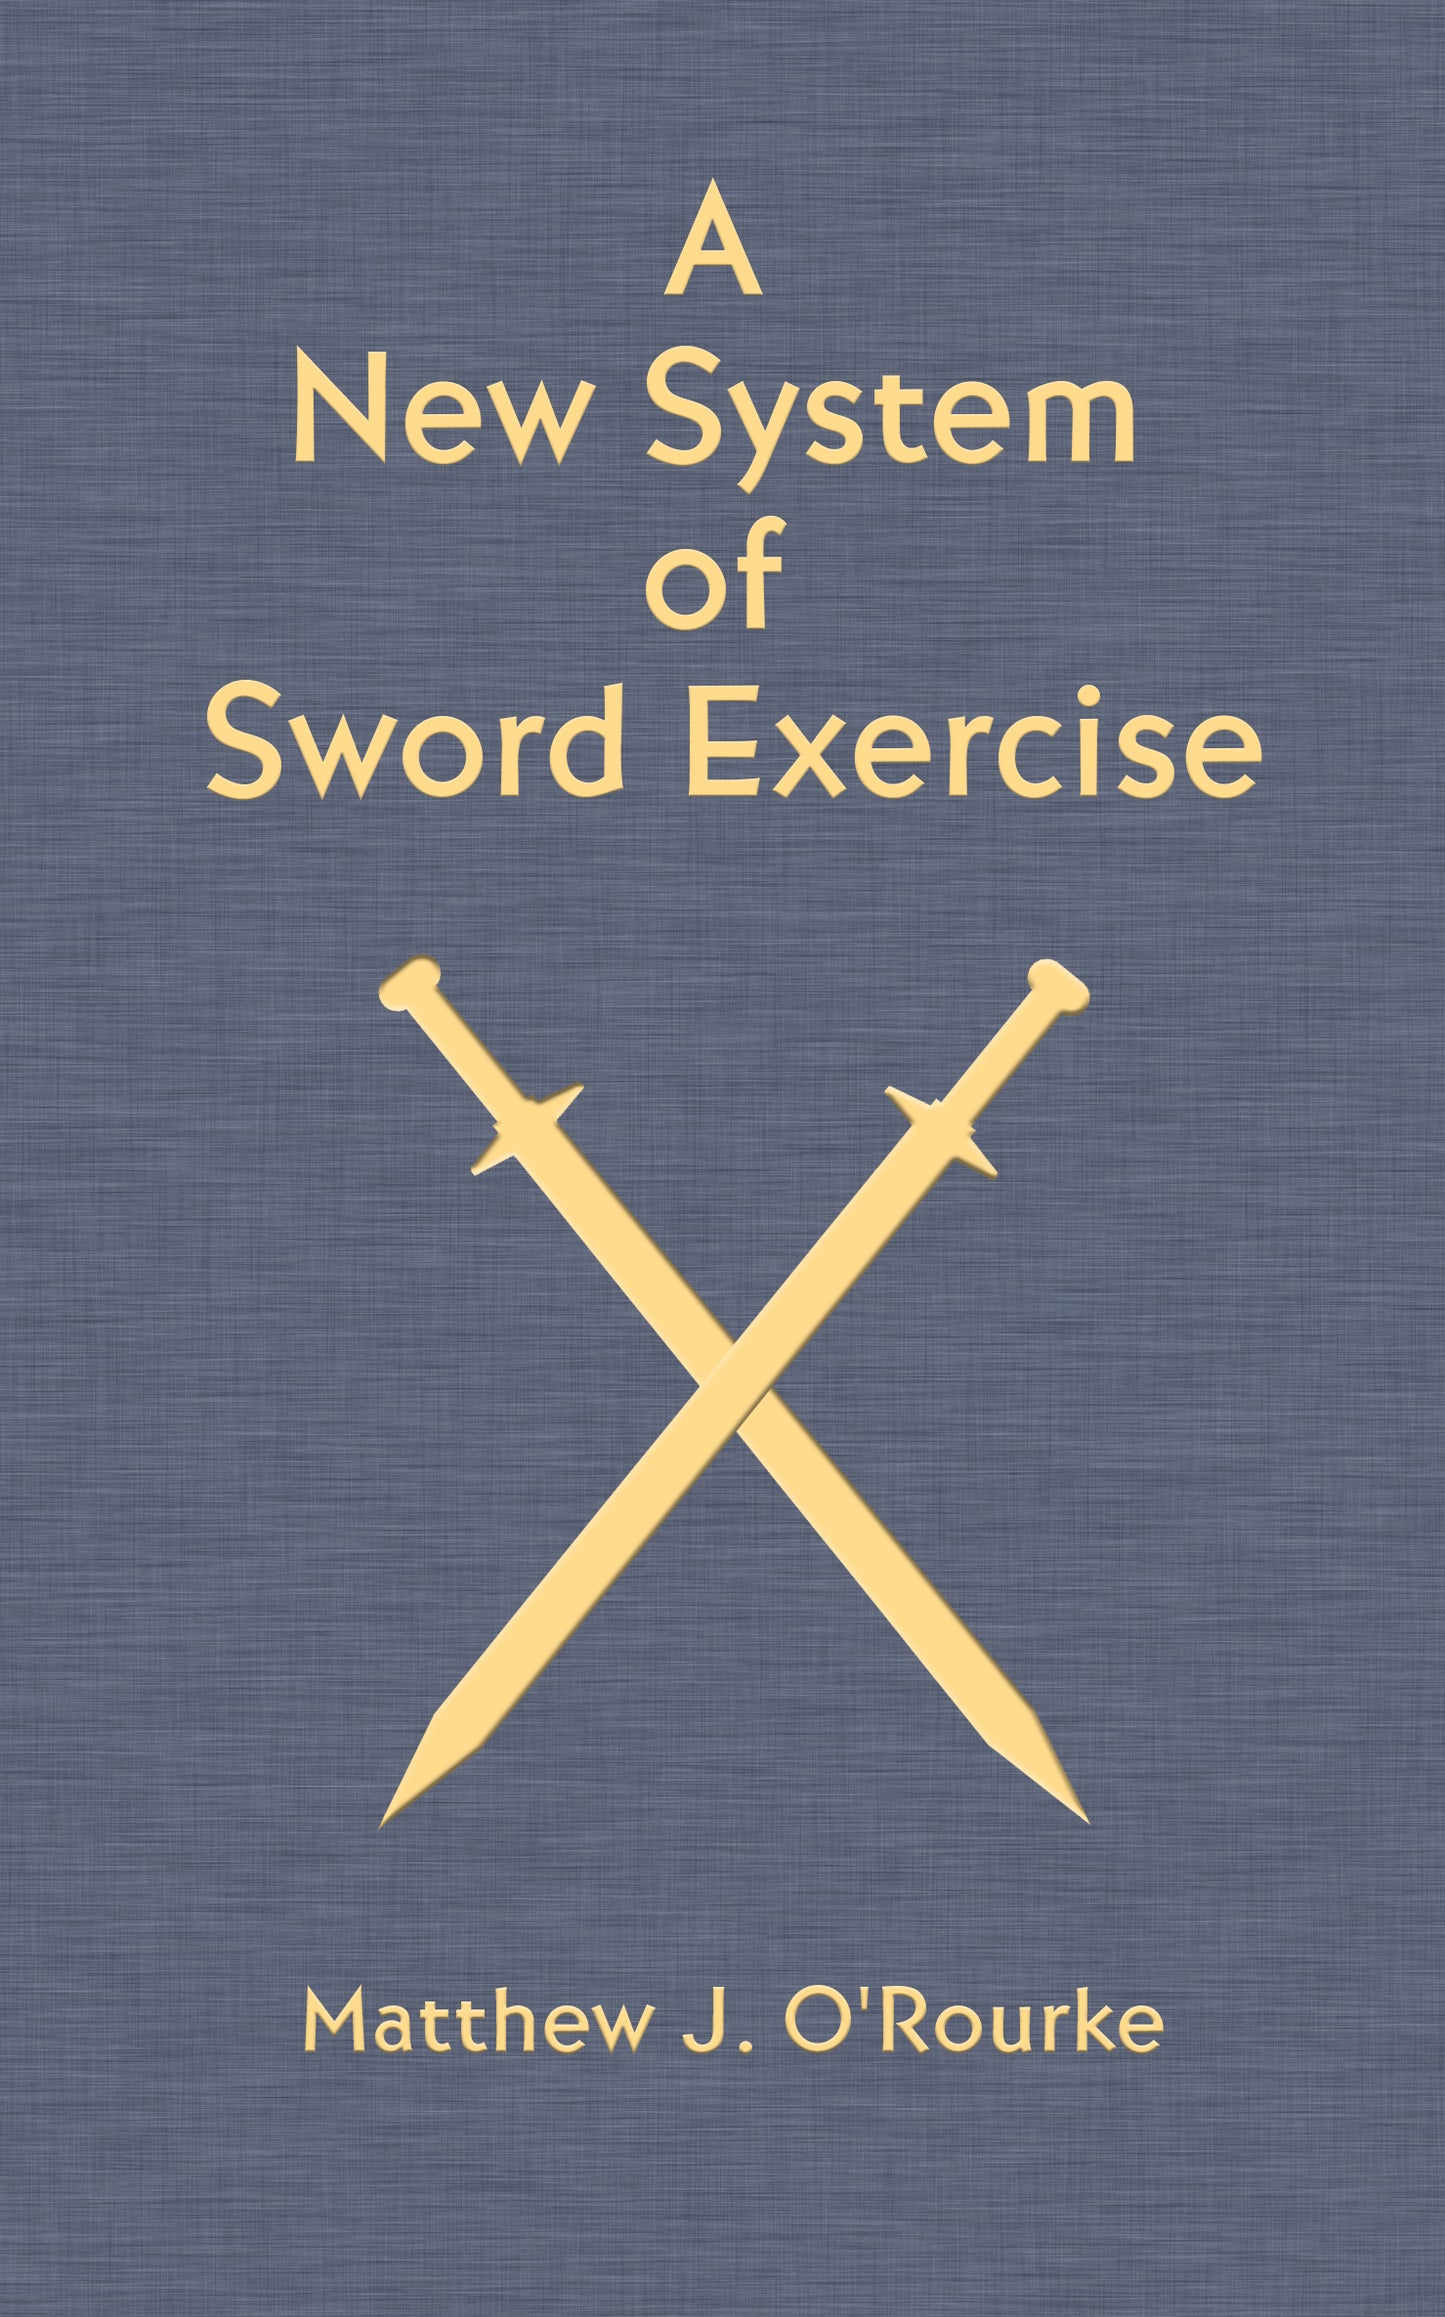 A New System of Sword Exercise